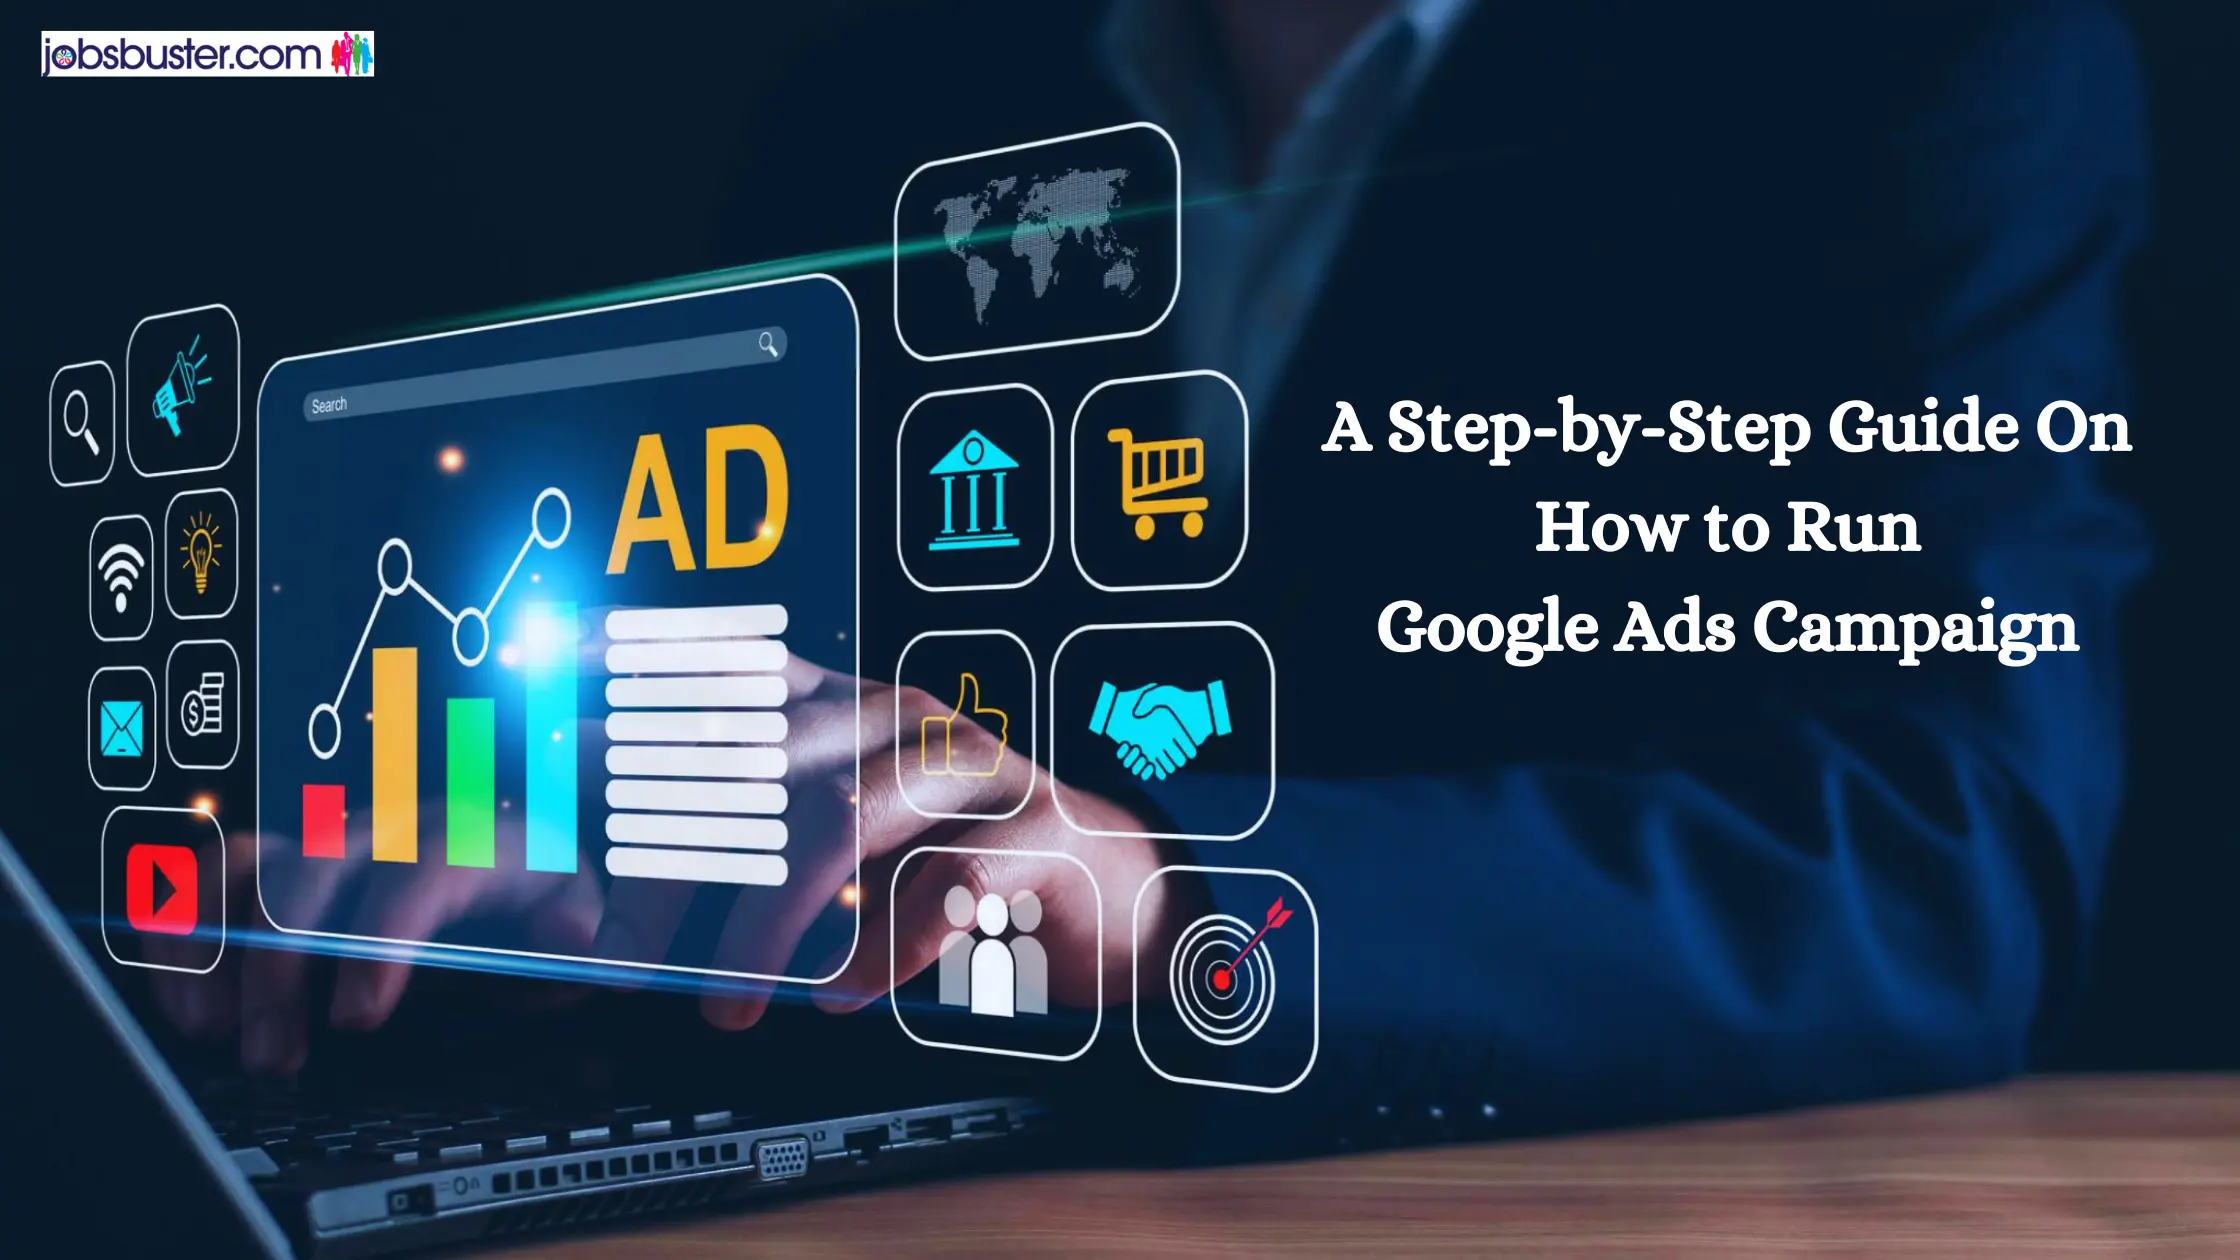 A Step-by-Step Guide On How to Run Google Ads Campaign